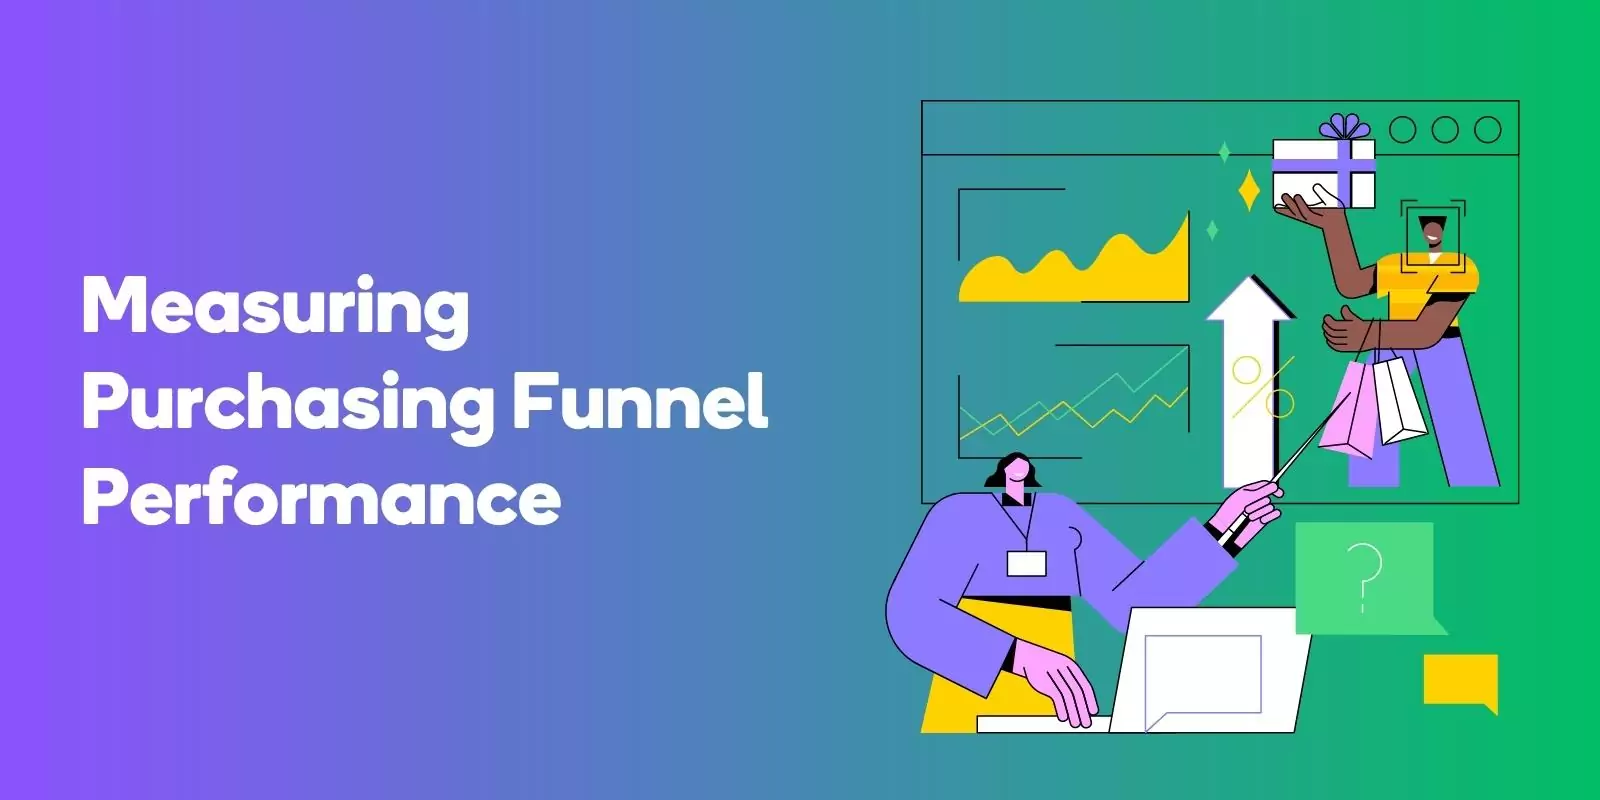 Measuring Purchasing Funnel Performance